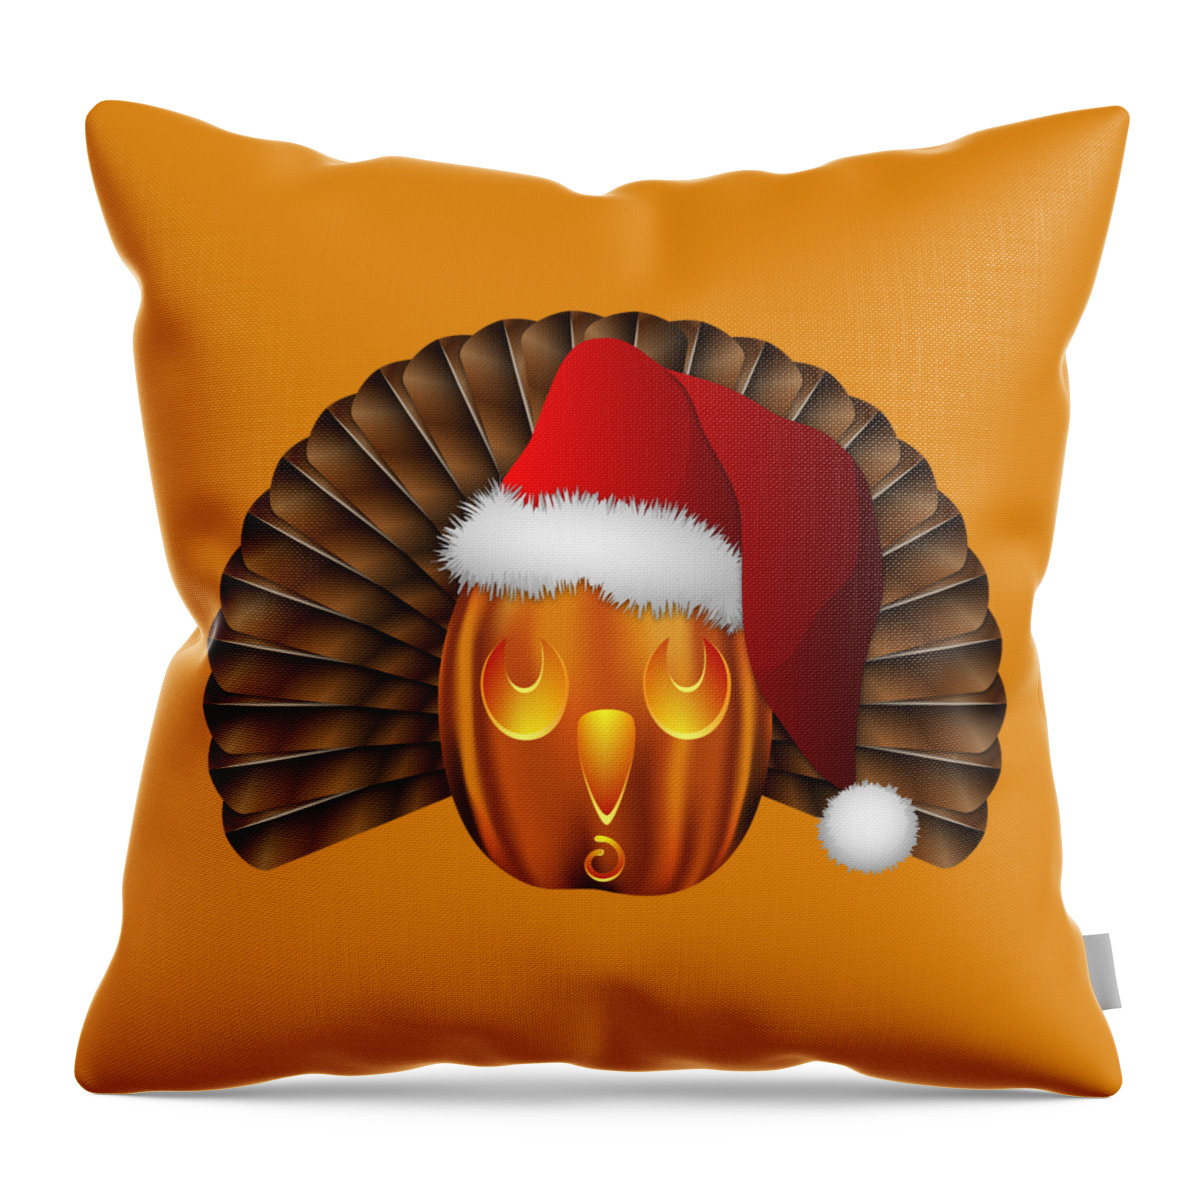 Holiday Graphic Throw Pillow featuring the digital art Hallowgivingmas Santa Turkey Pumpkin by MM Anderson